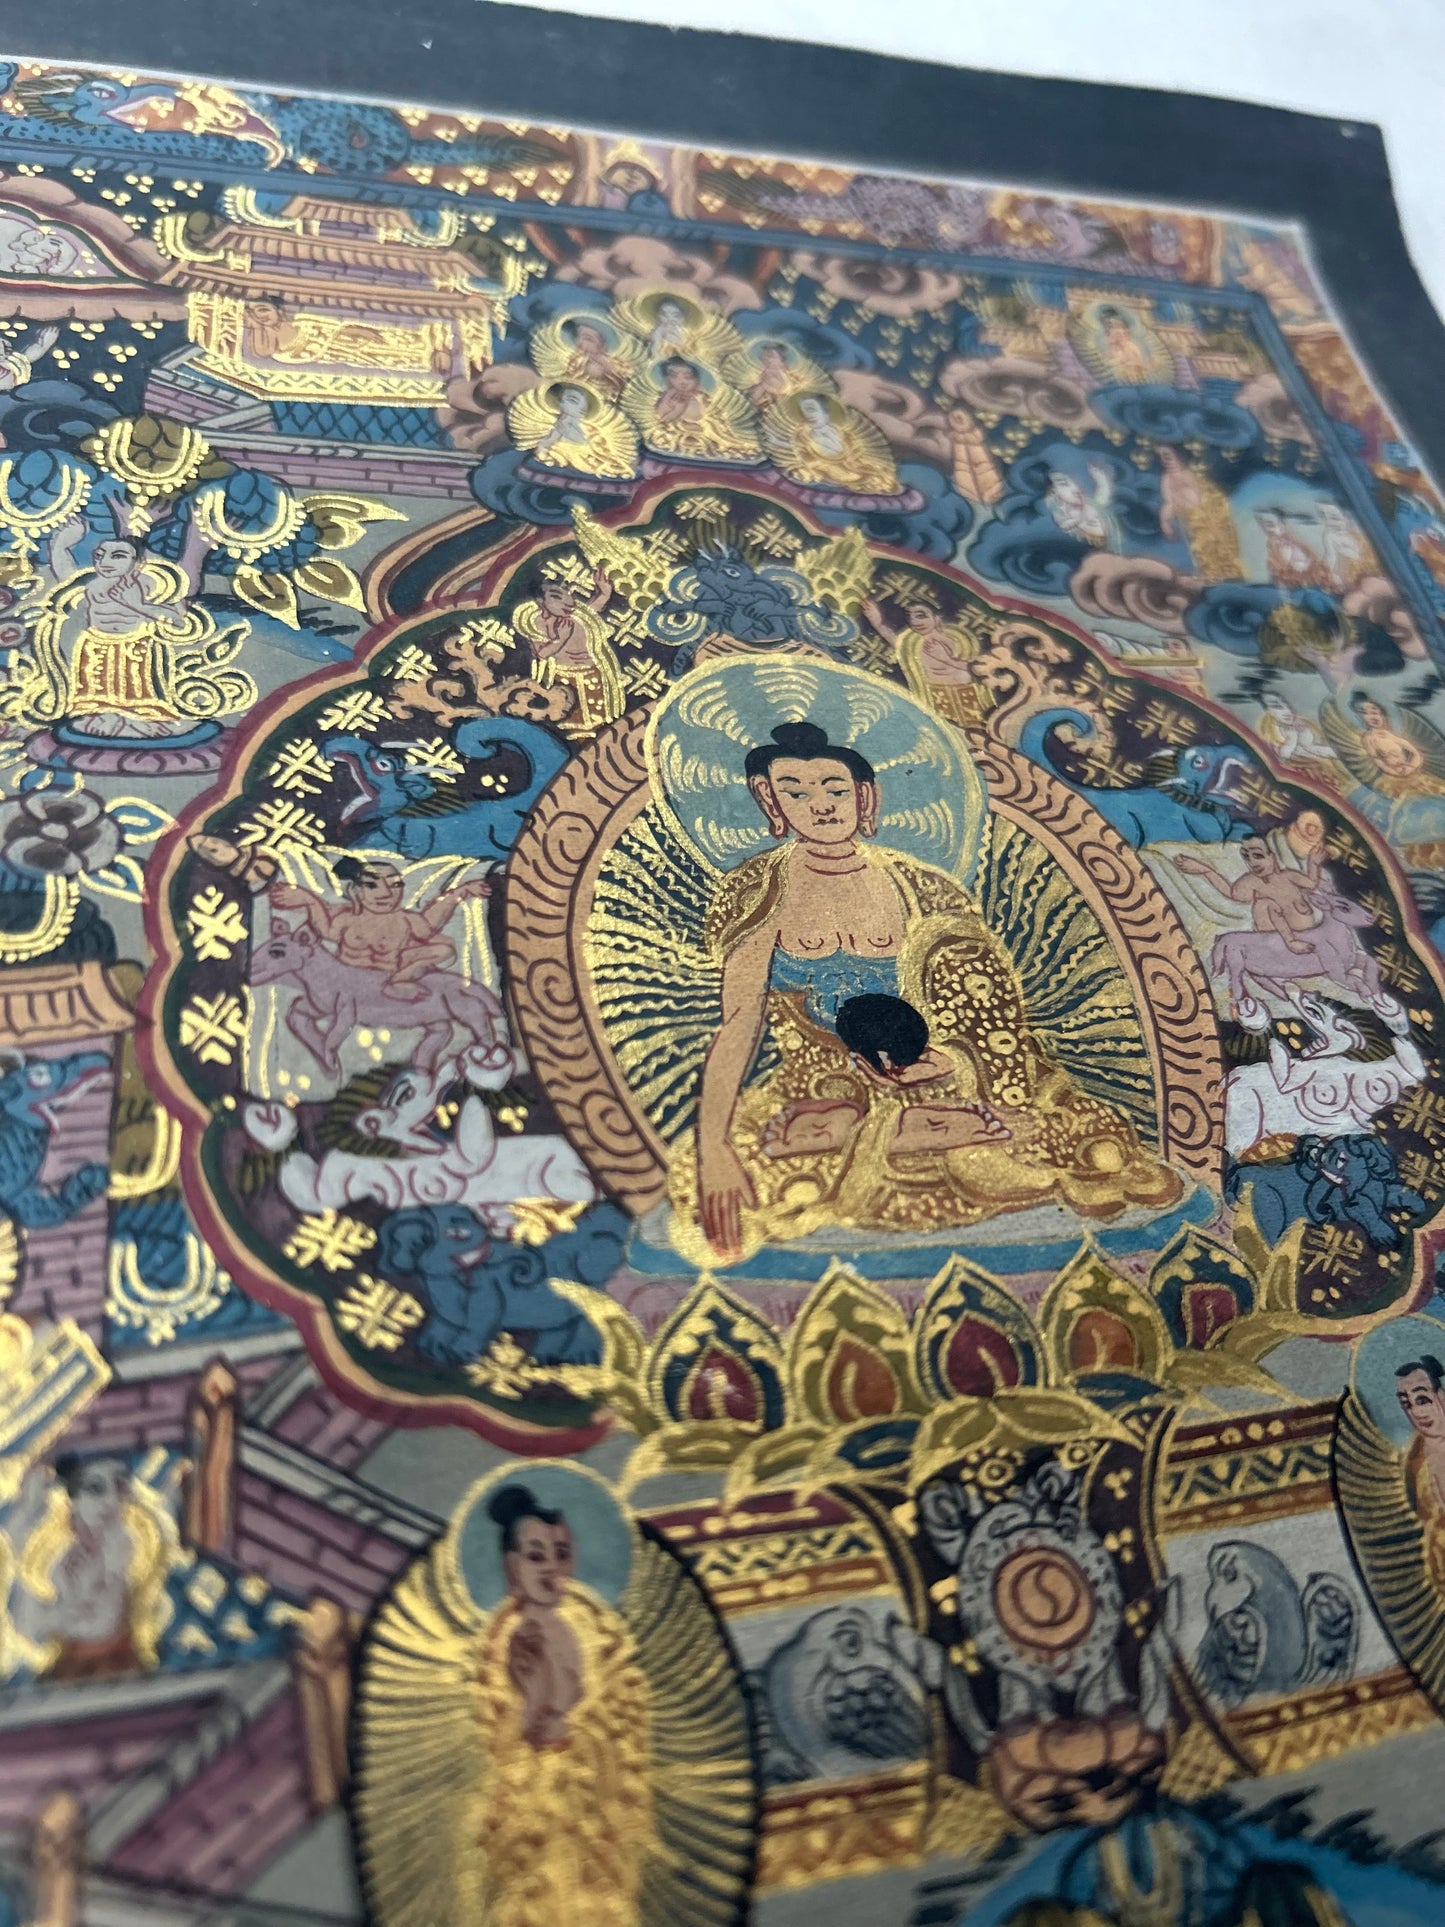 Buddha's Life Story Thangka: Artistic Journey of Enlightenment